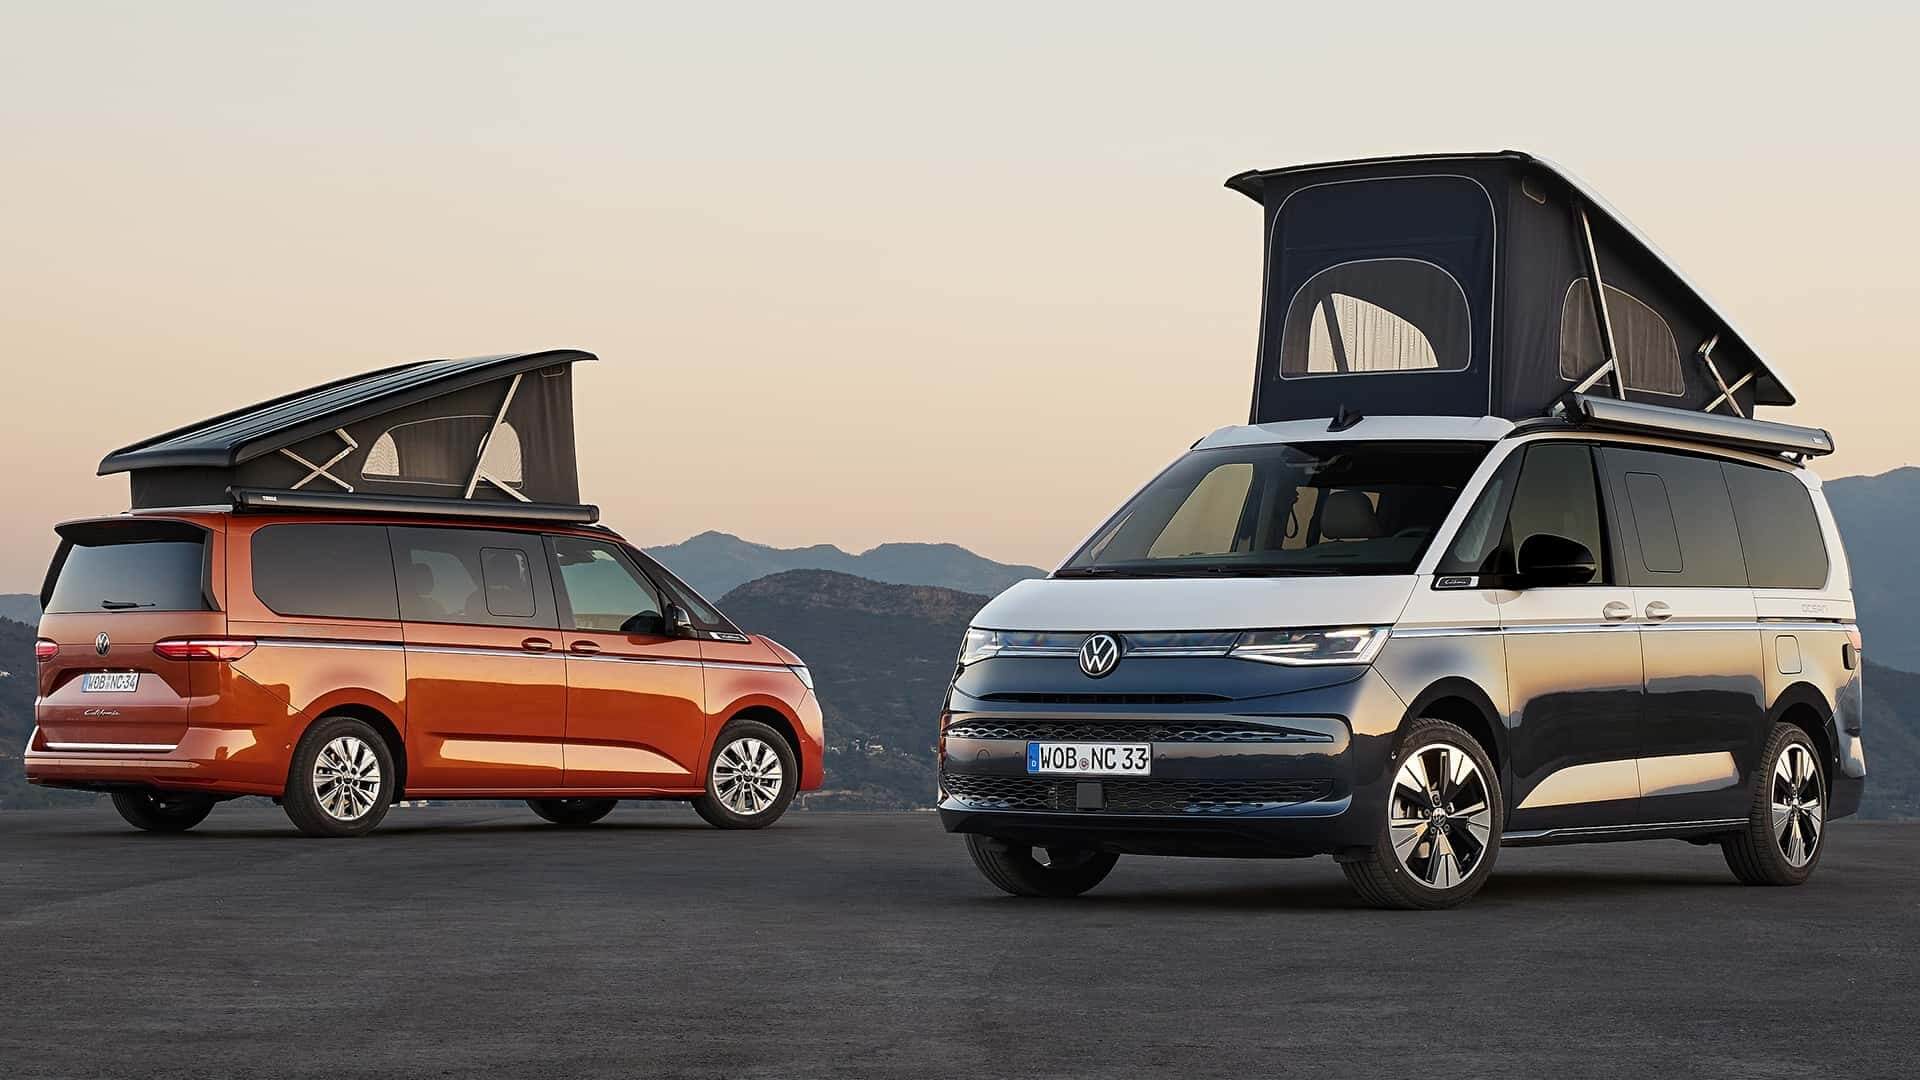 Volkswagen introduced the new California camper